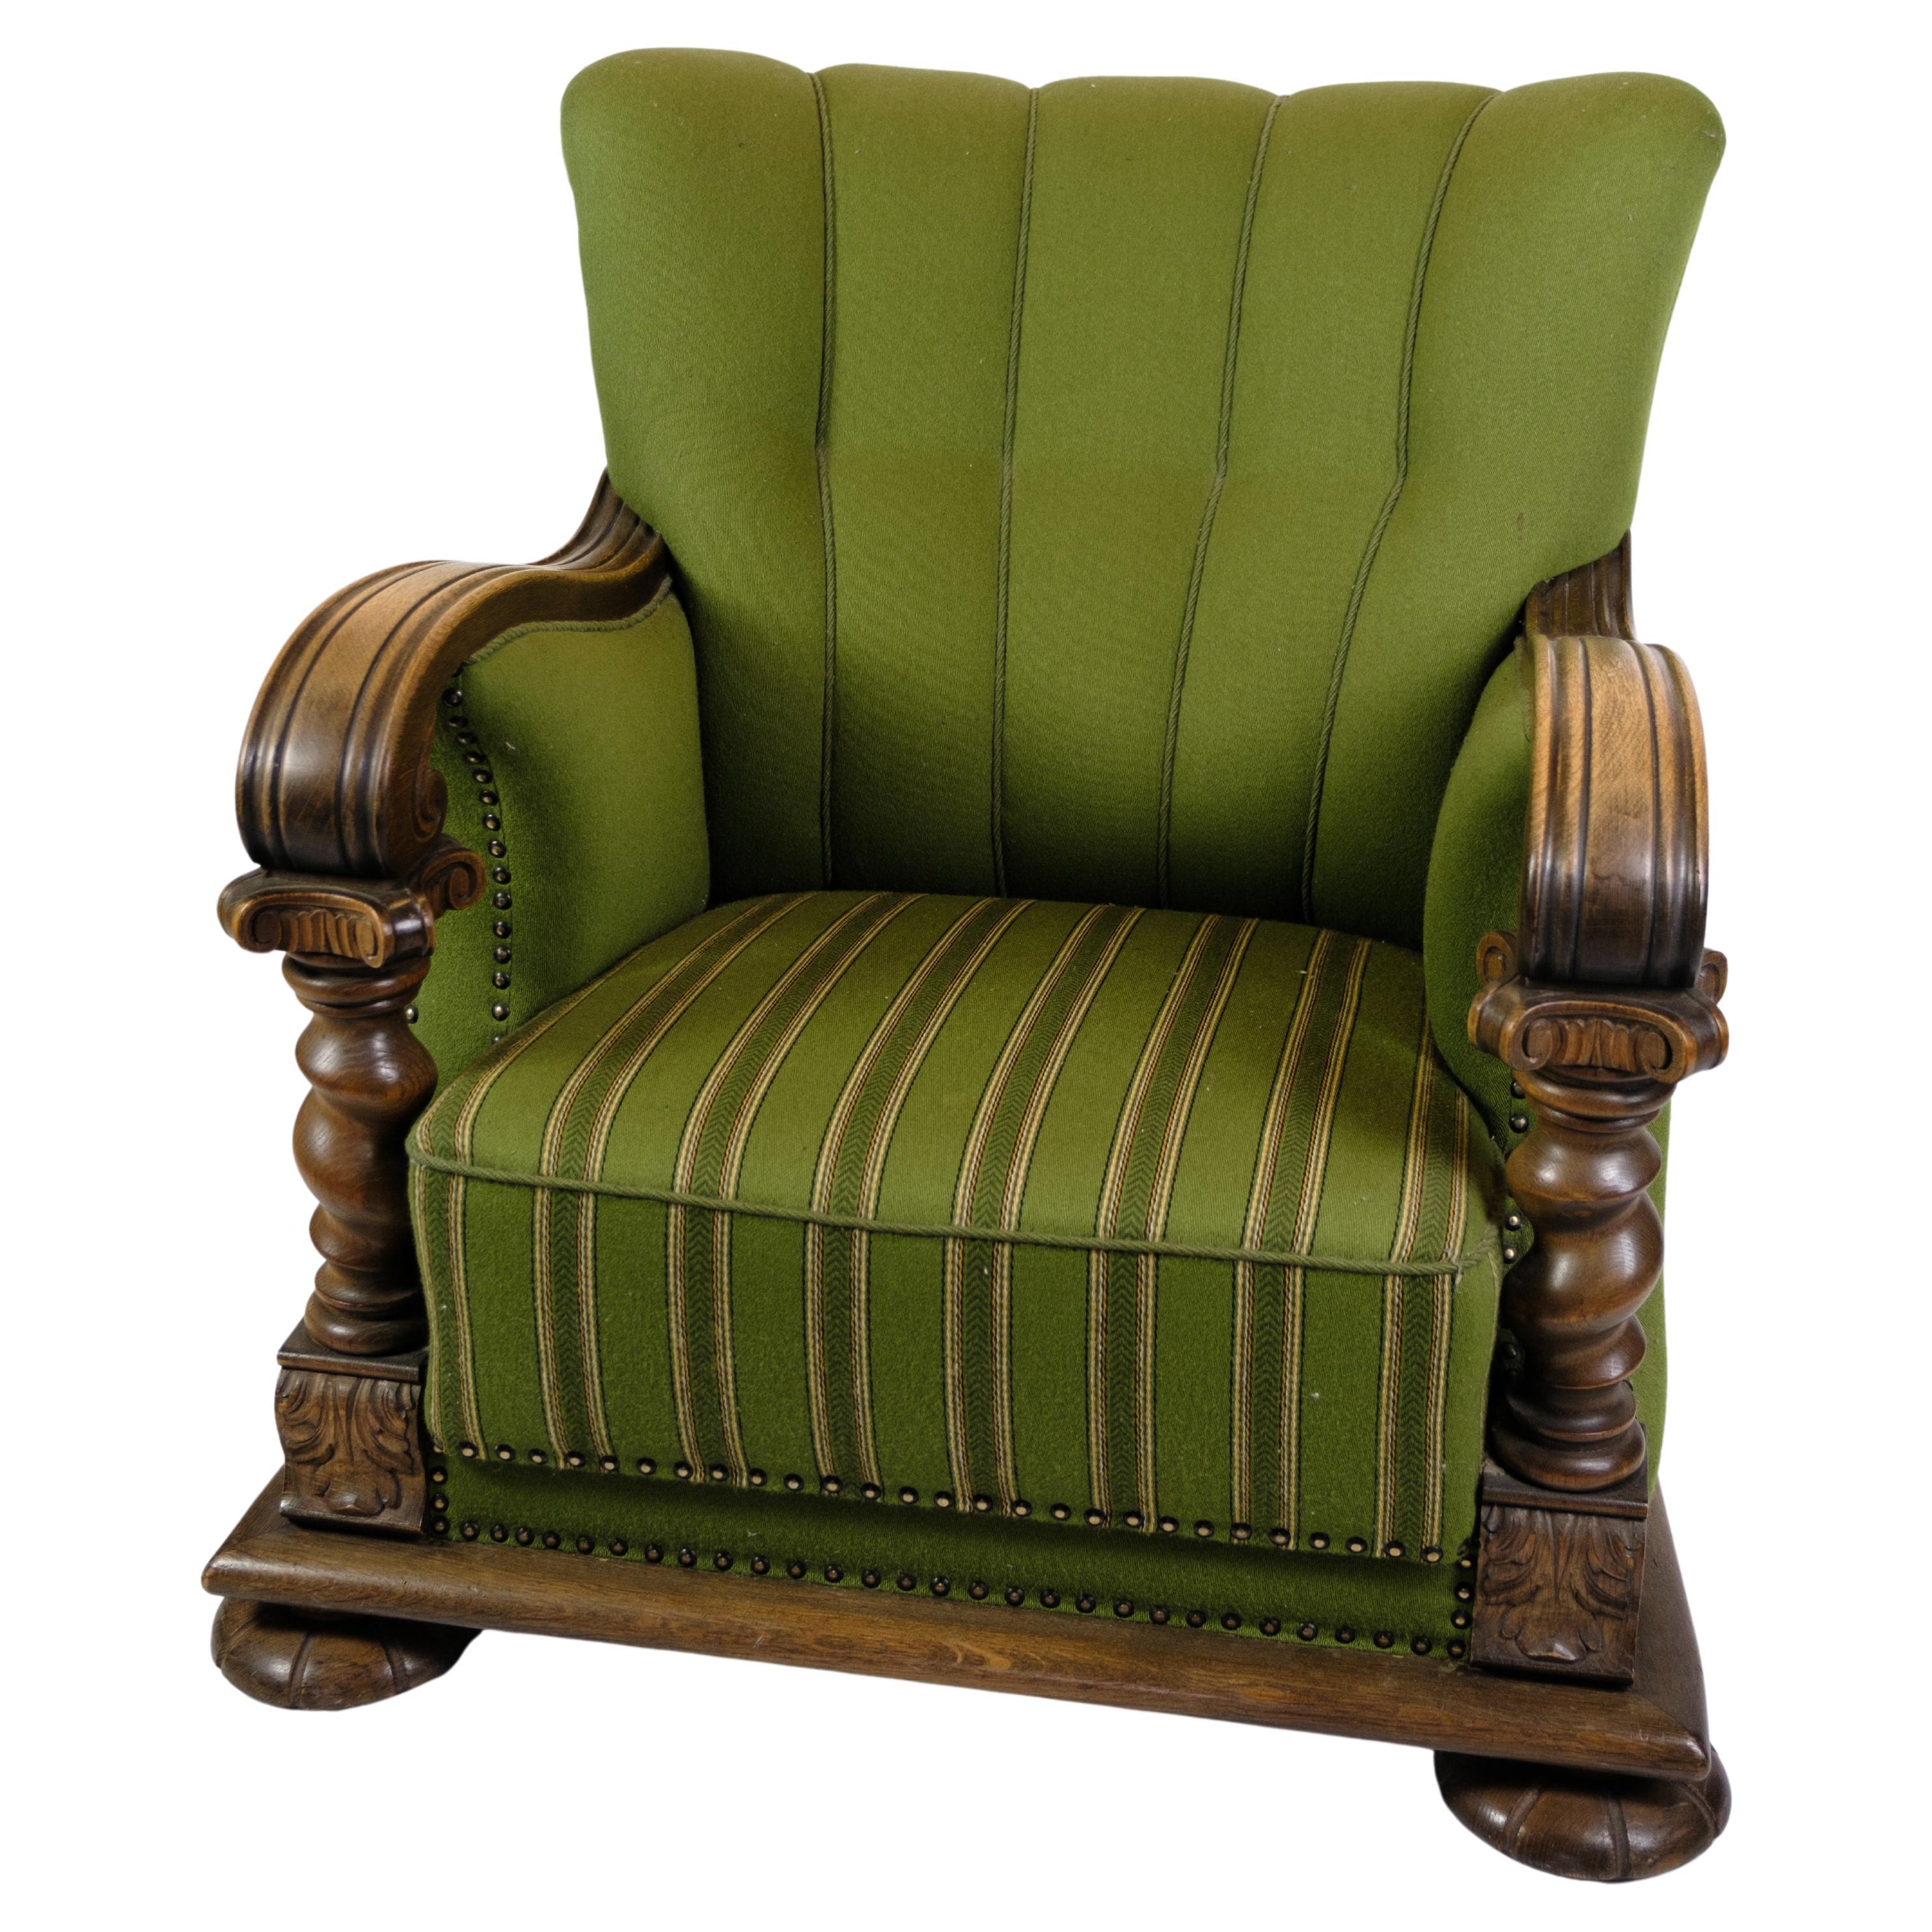 Armchair in Green Fabric with Wood Carvings from 1920s. For Sale